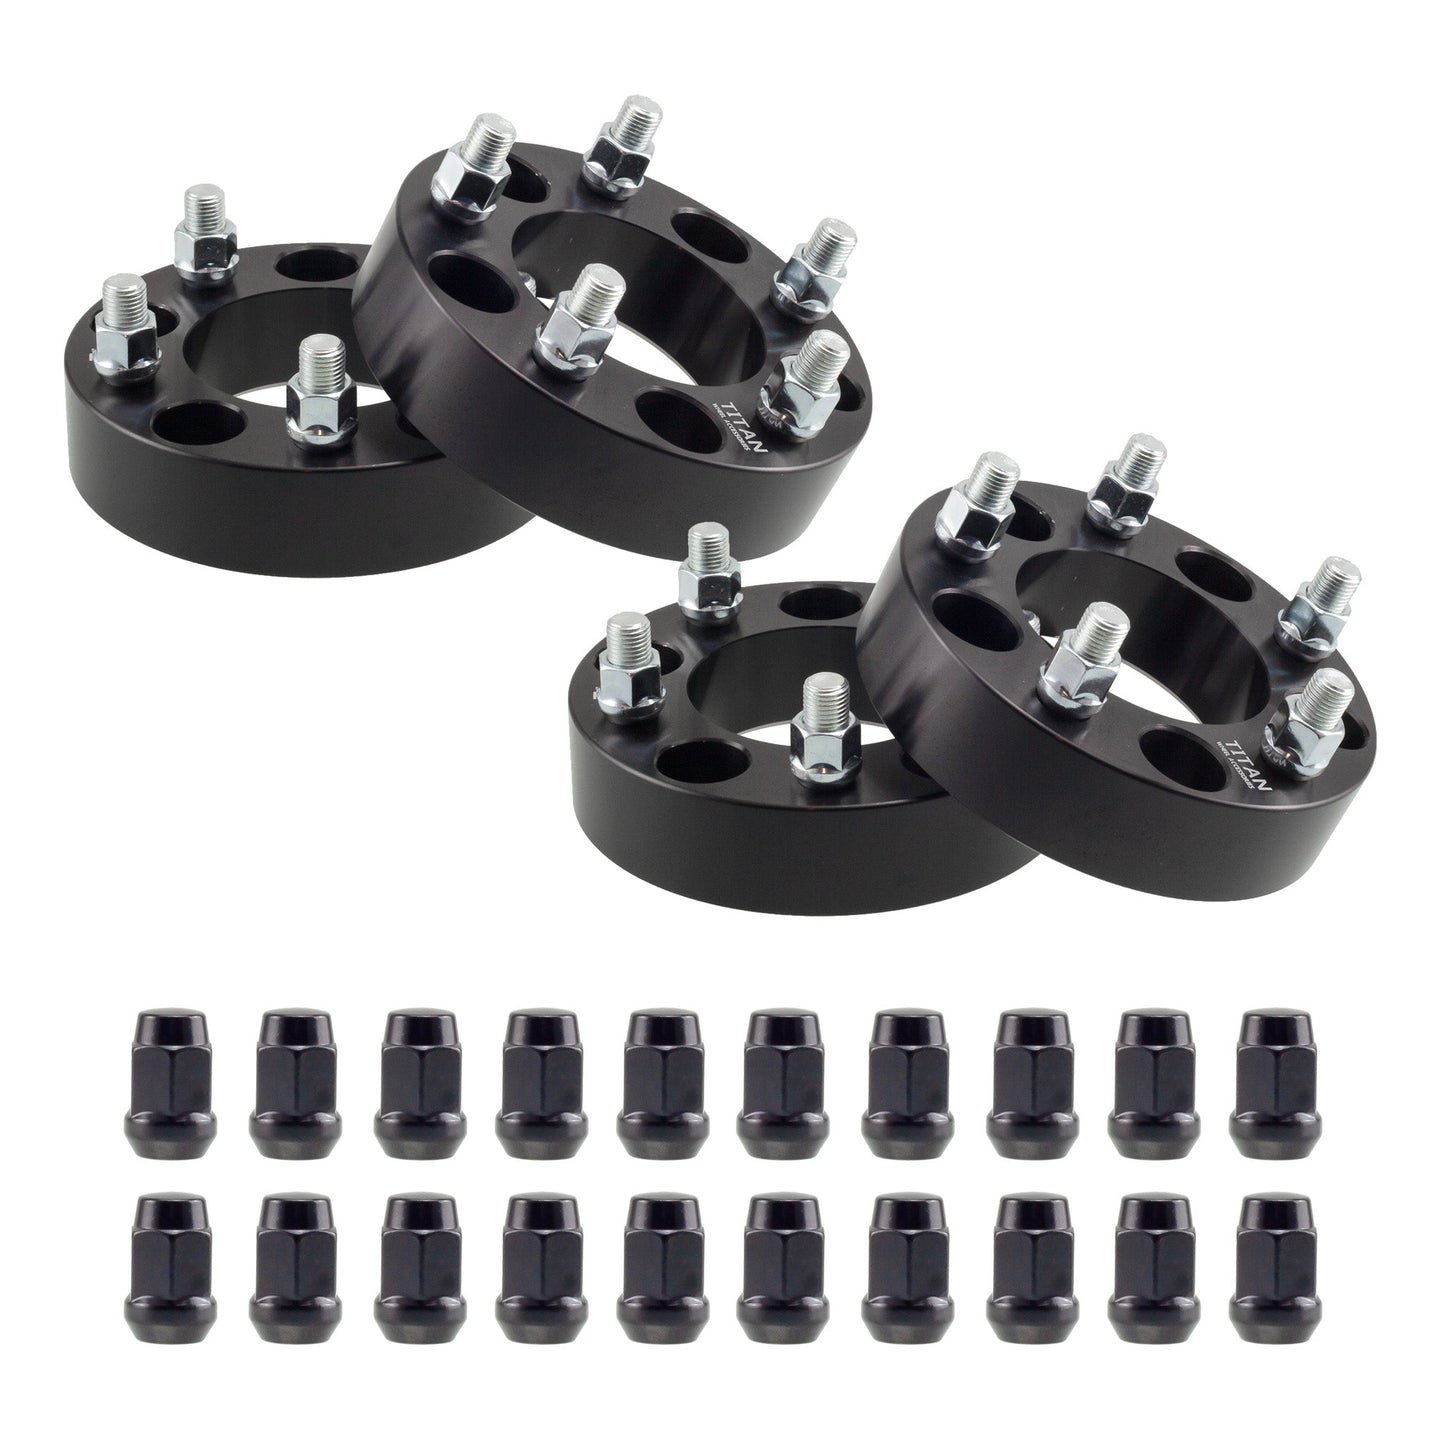 1.25" (32mm) Titan Wheel Spacers for Ford Mustang Ranger Edge Explorer | 5x4.5 (5x114.3) | 70.5 Hubcentric |1/2x20 Studs | Titan Wheel Accessories